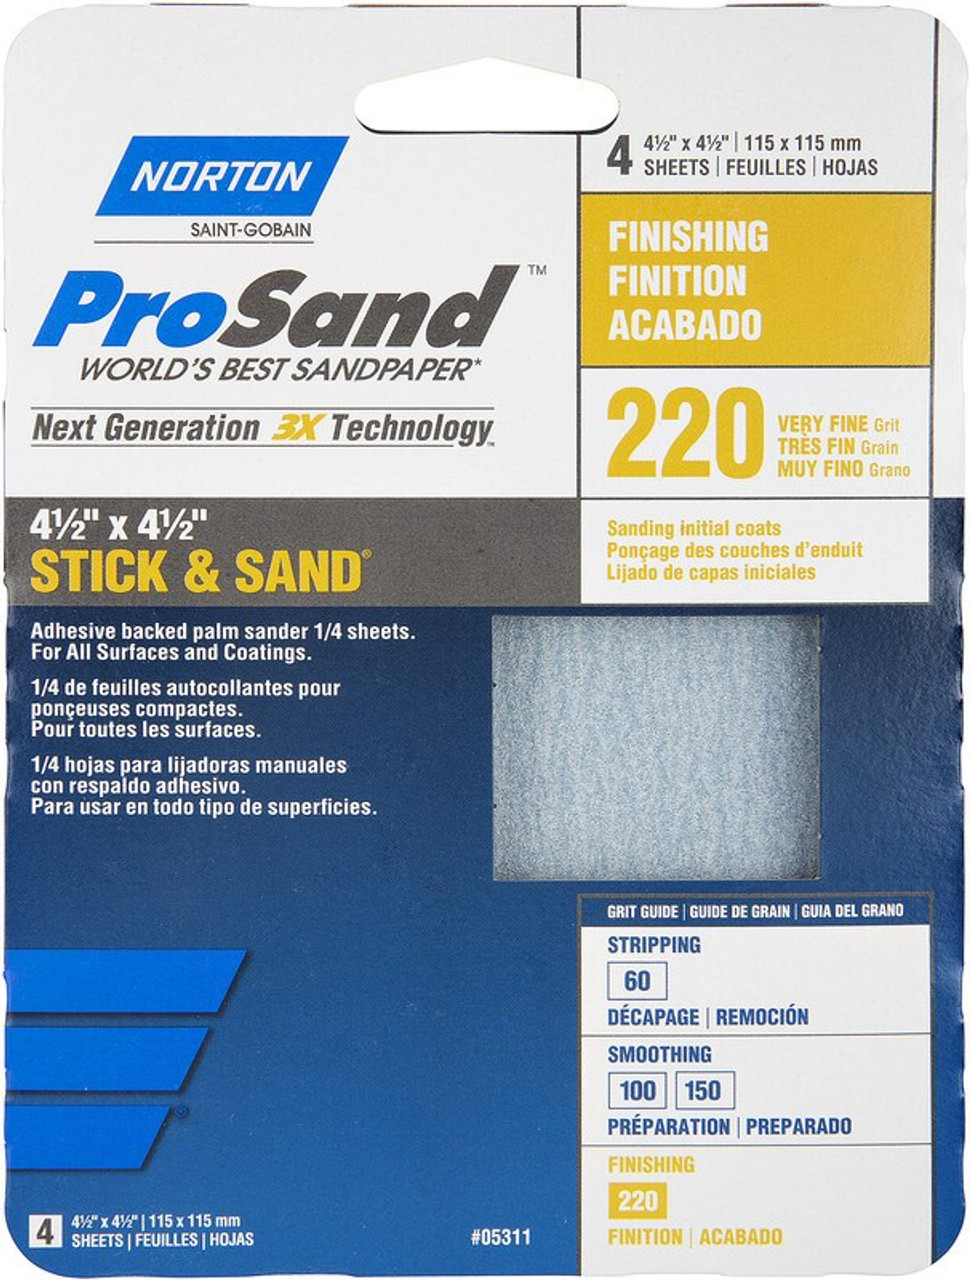 Norton 05310, 3X Stick and Sand  220 Grit, 4-1/2-Inch x 4-1/2-Inch Sandpaper, 1 Pk of 4 Sheets